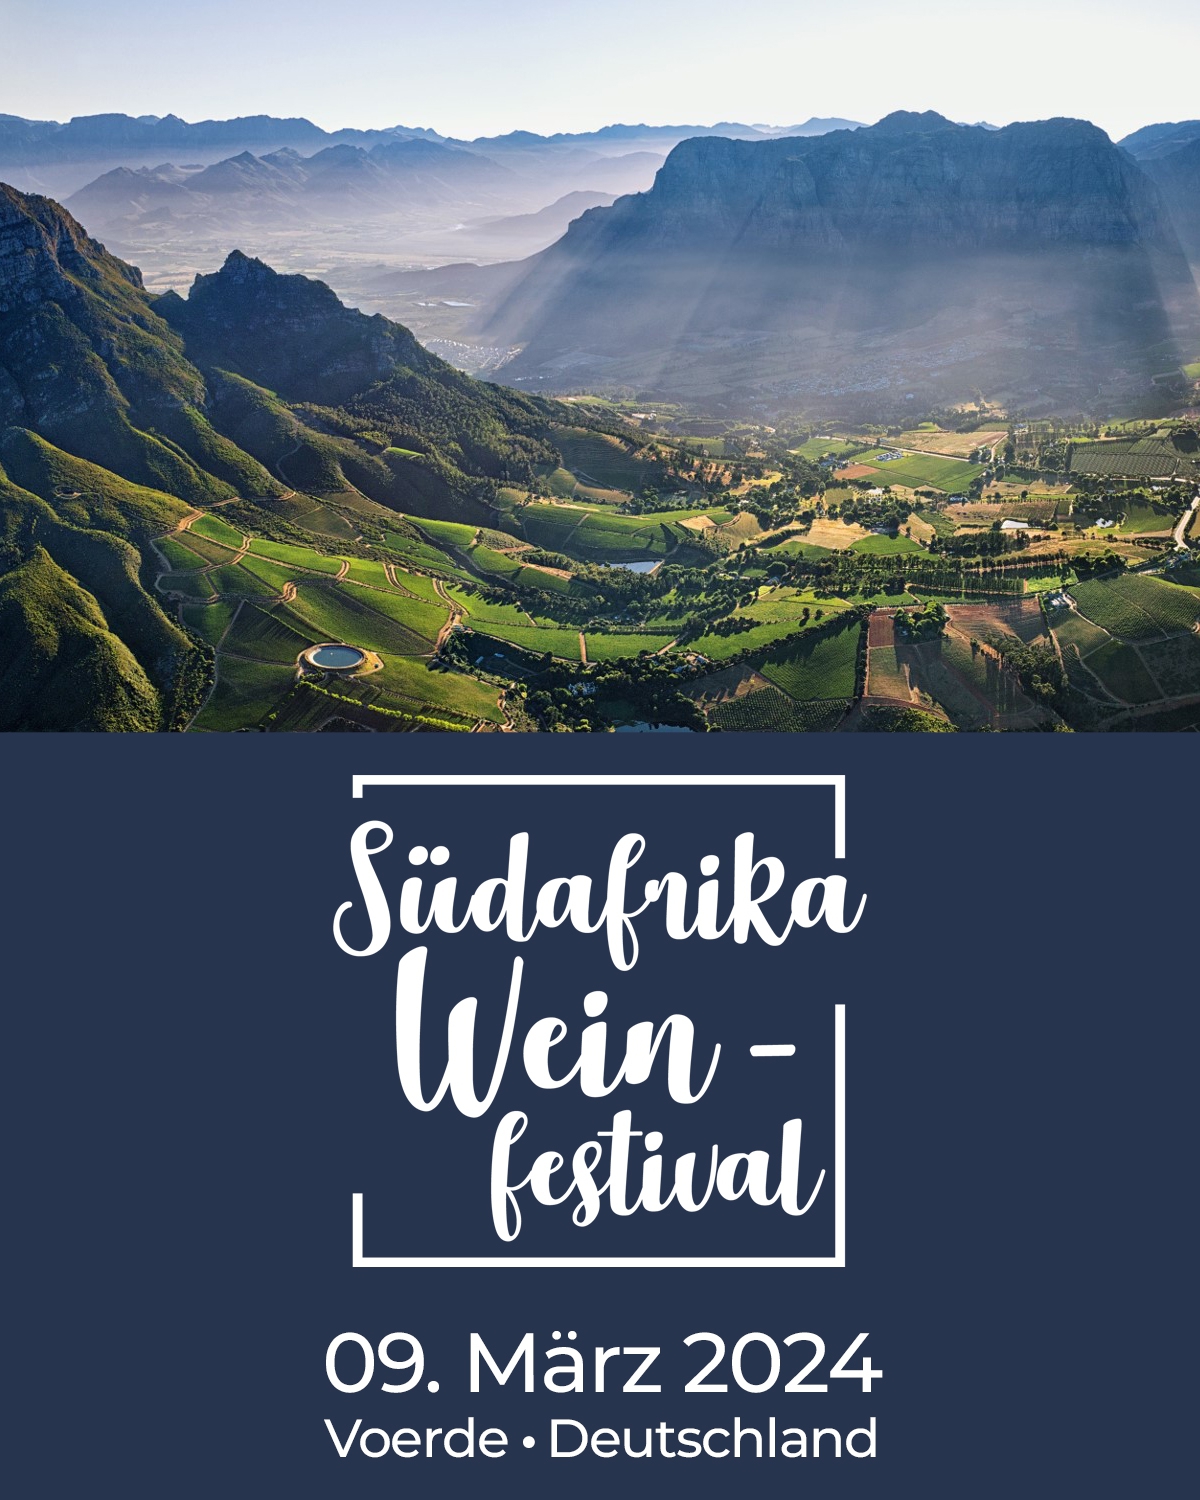 Ticket: South Africa Wine Festival 2024